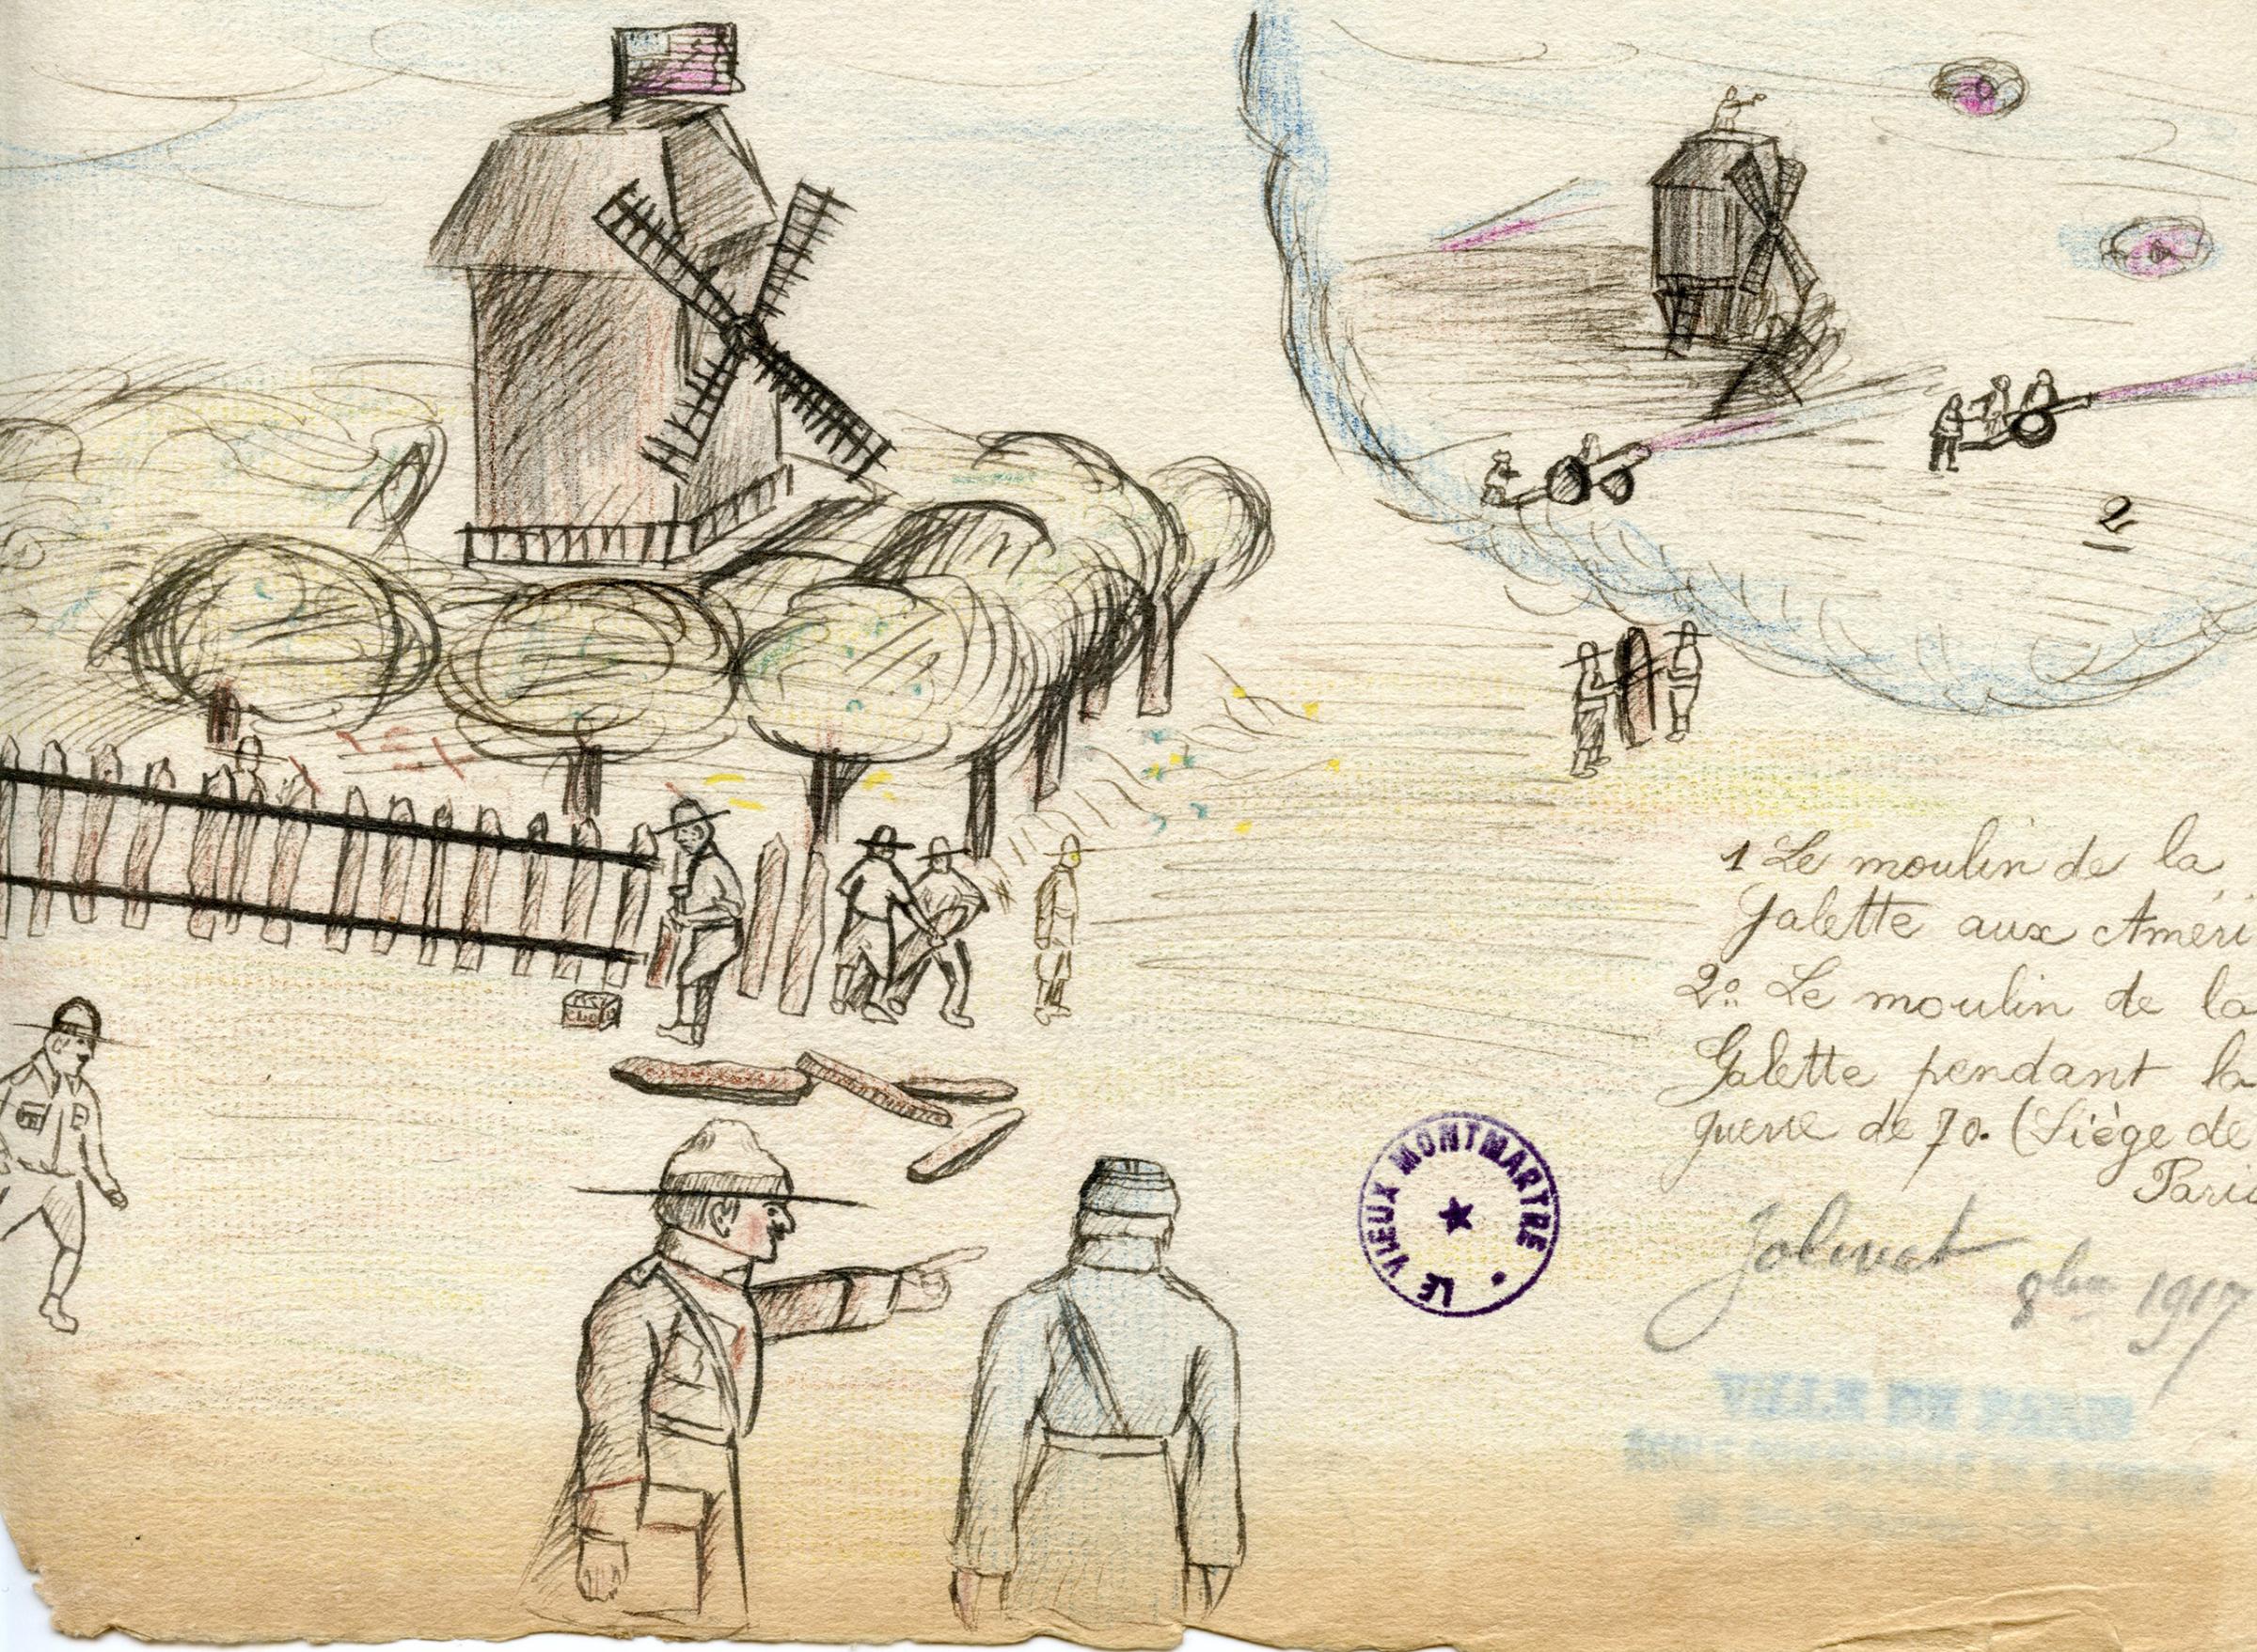 Drawings by French school children after the Americans landed in France in 1917.